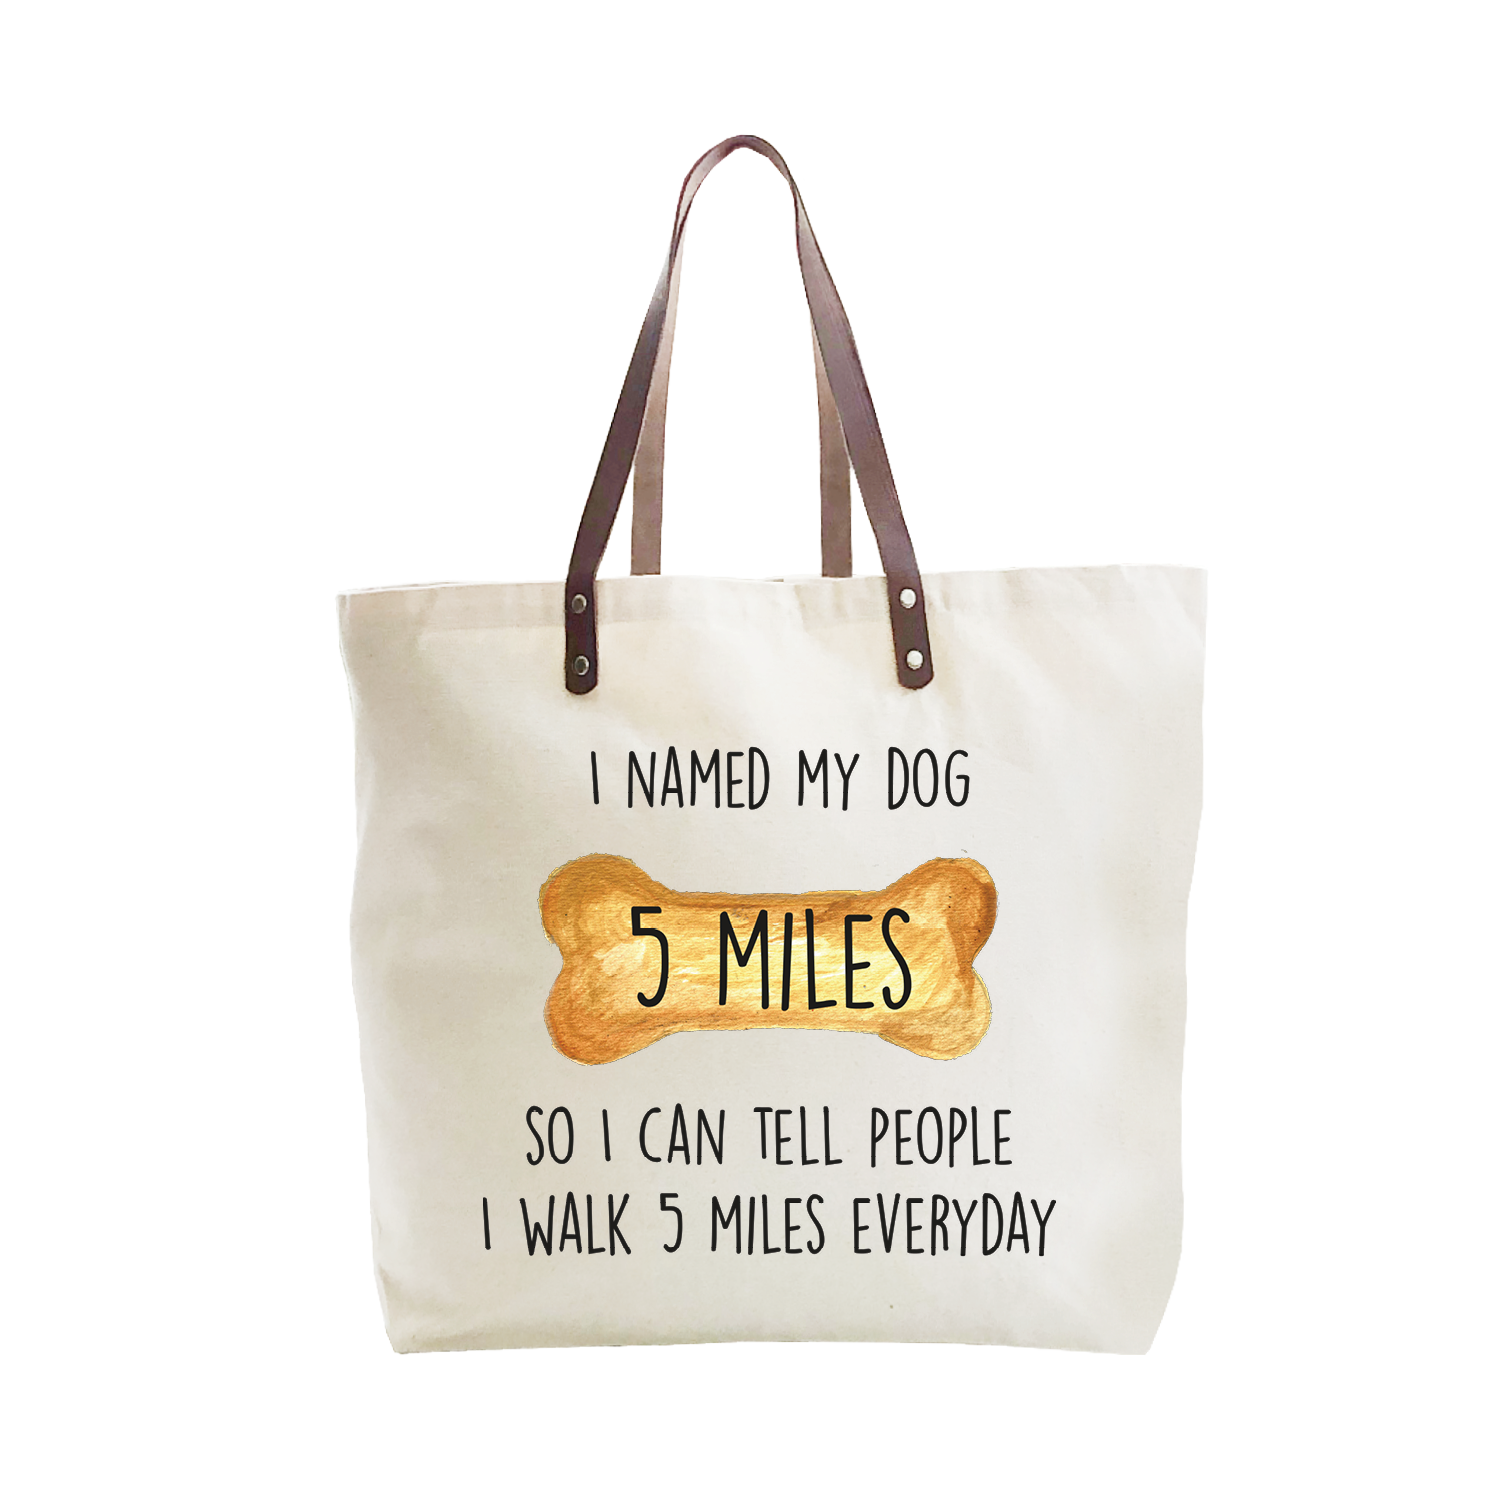 5 miles large tote